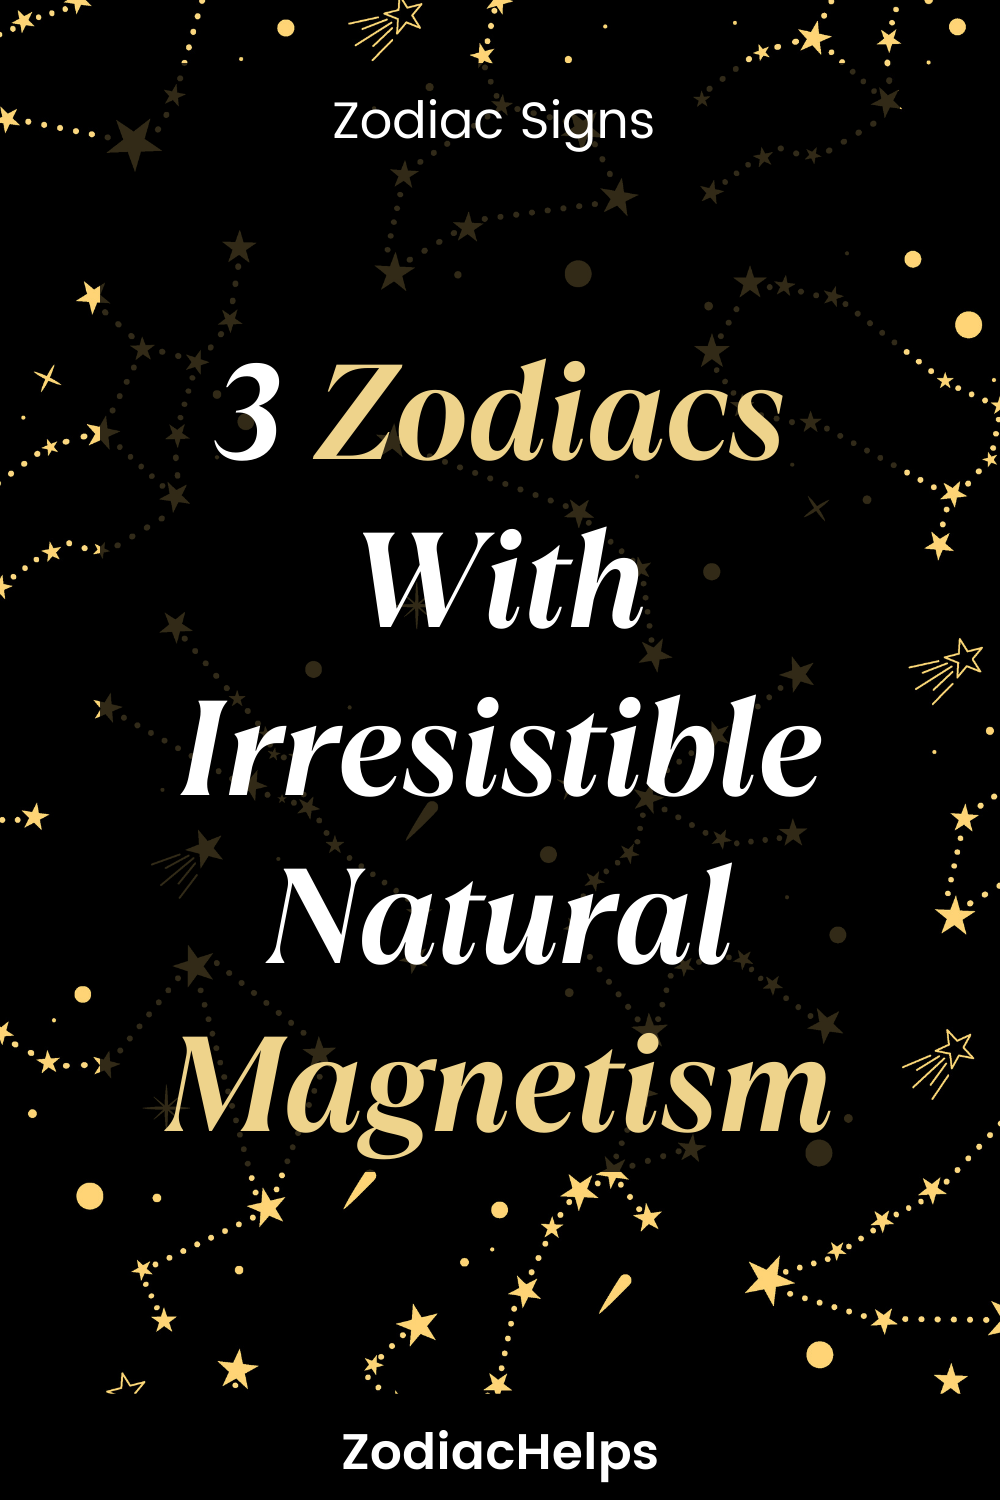 3 Zodiacs With Irresistible Natural Magnetism